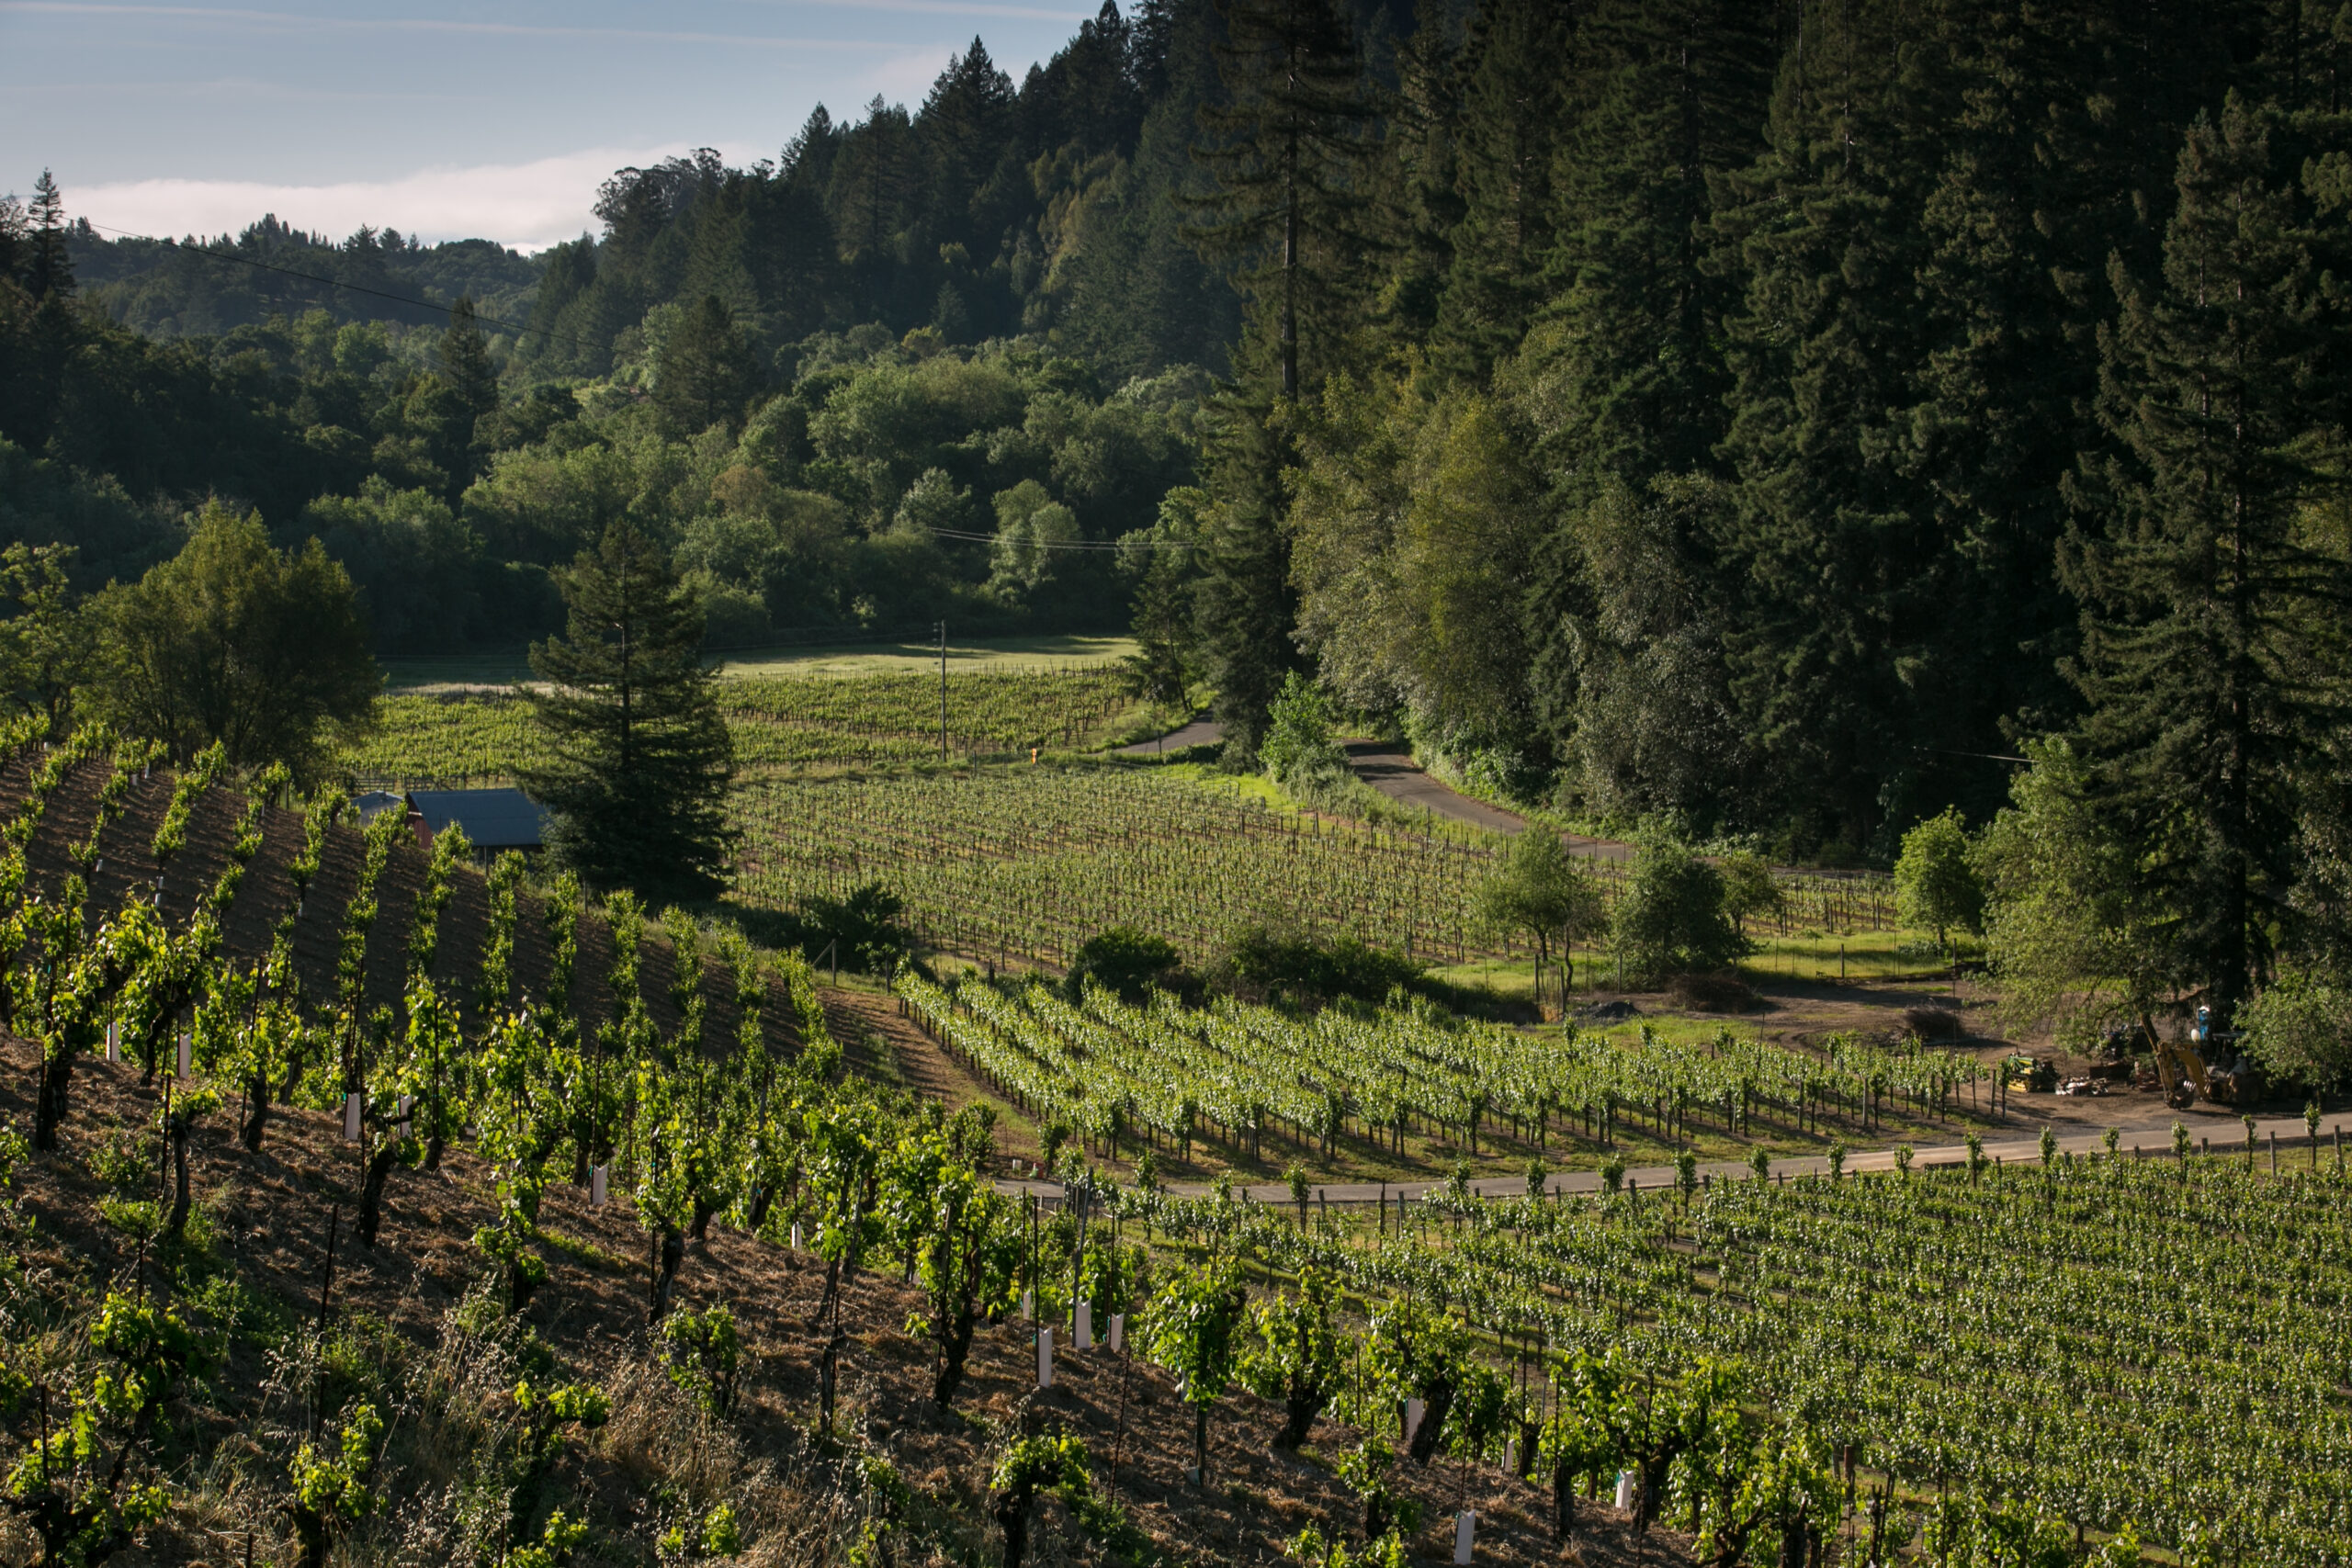 Vineyards in valley surrounded by redwoods